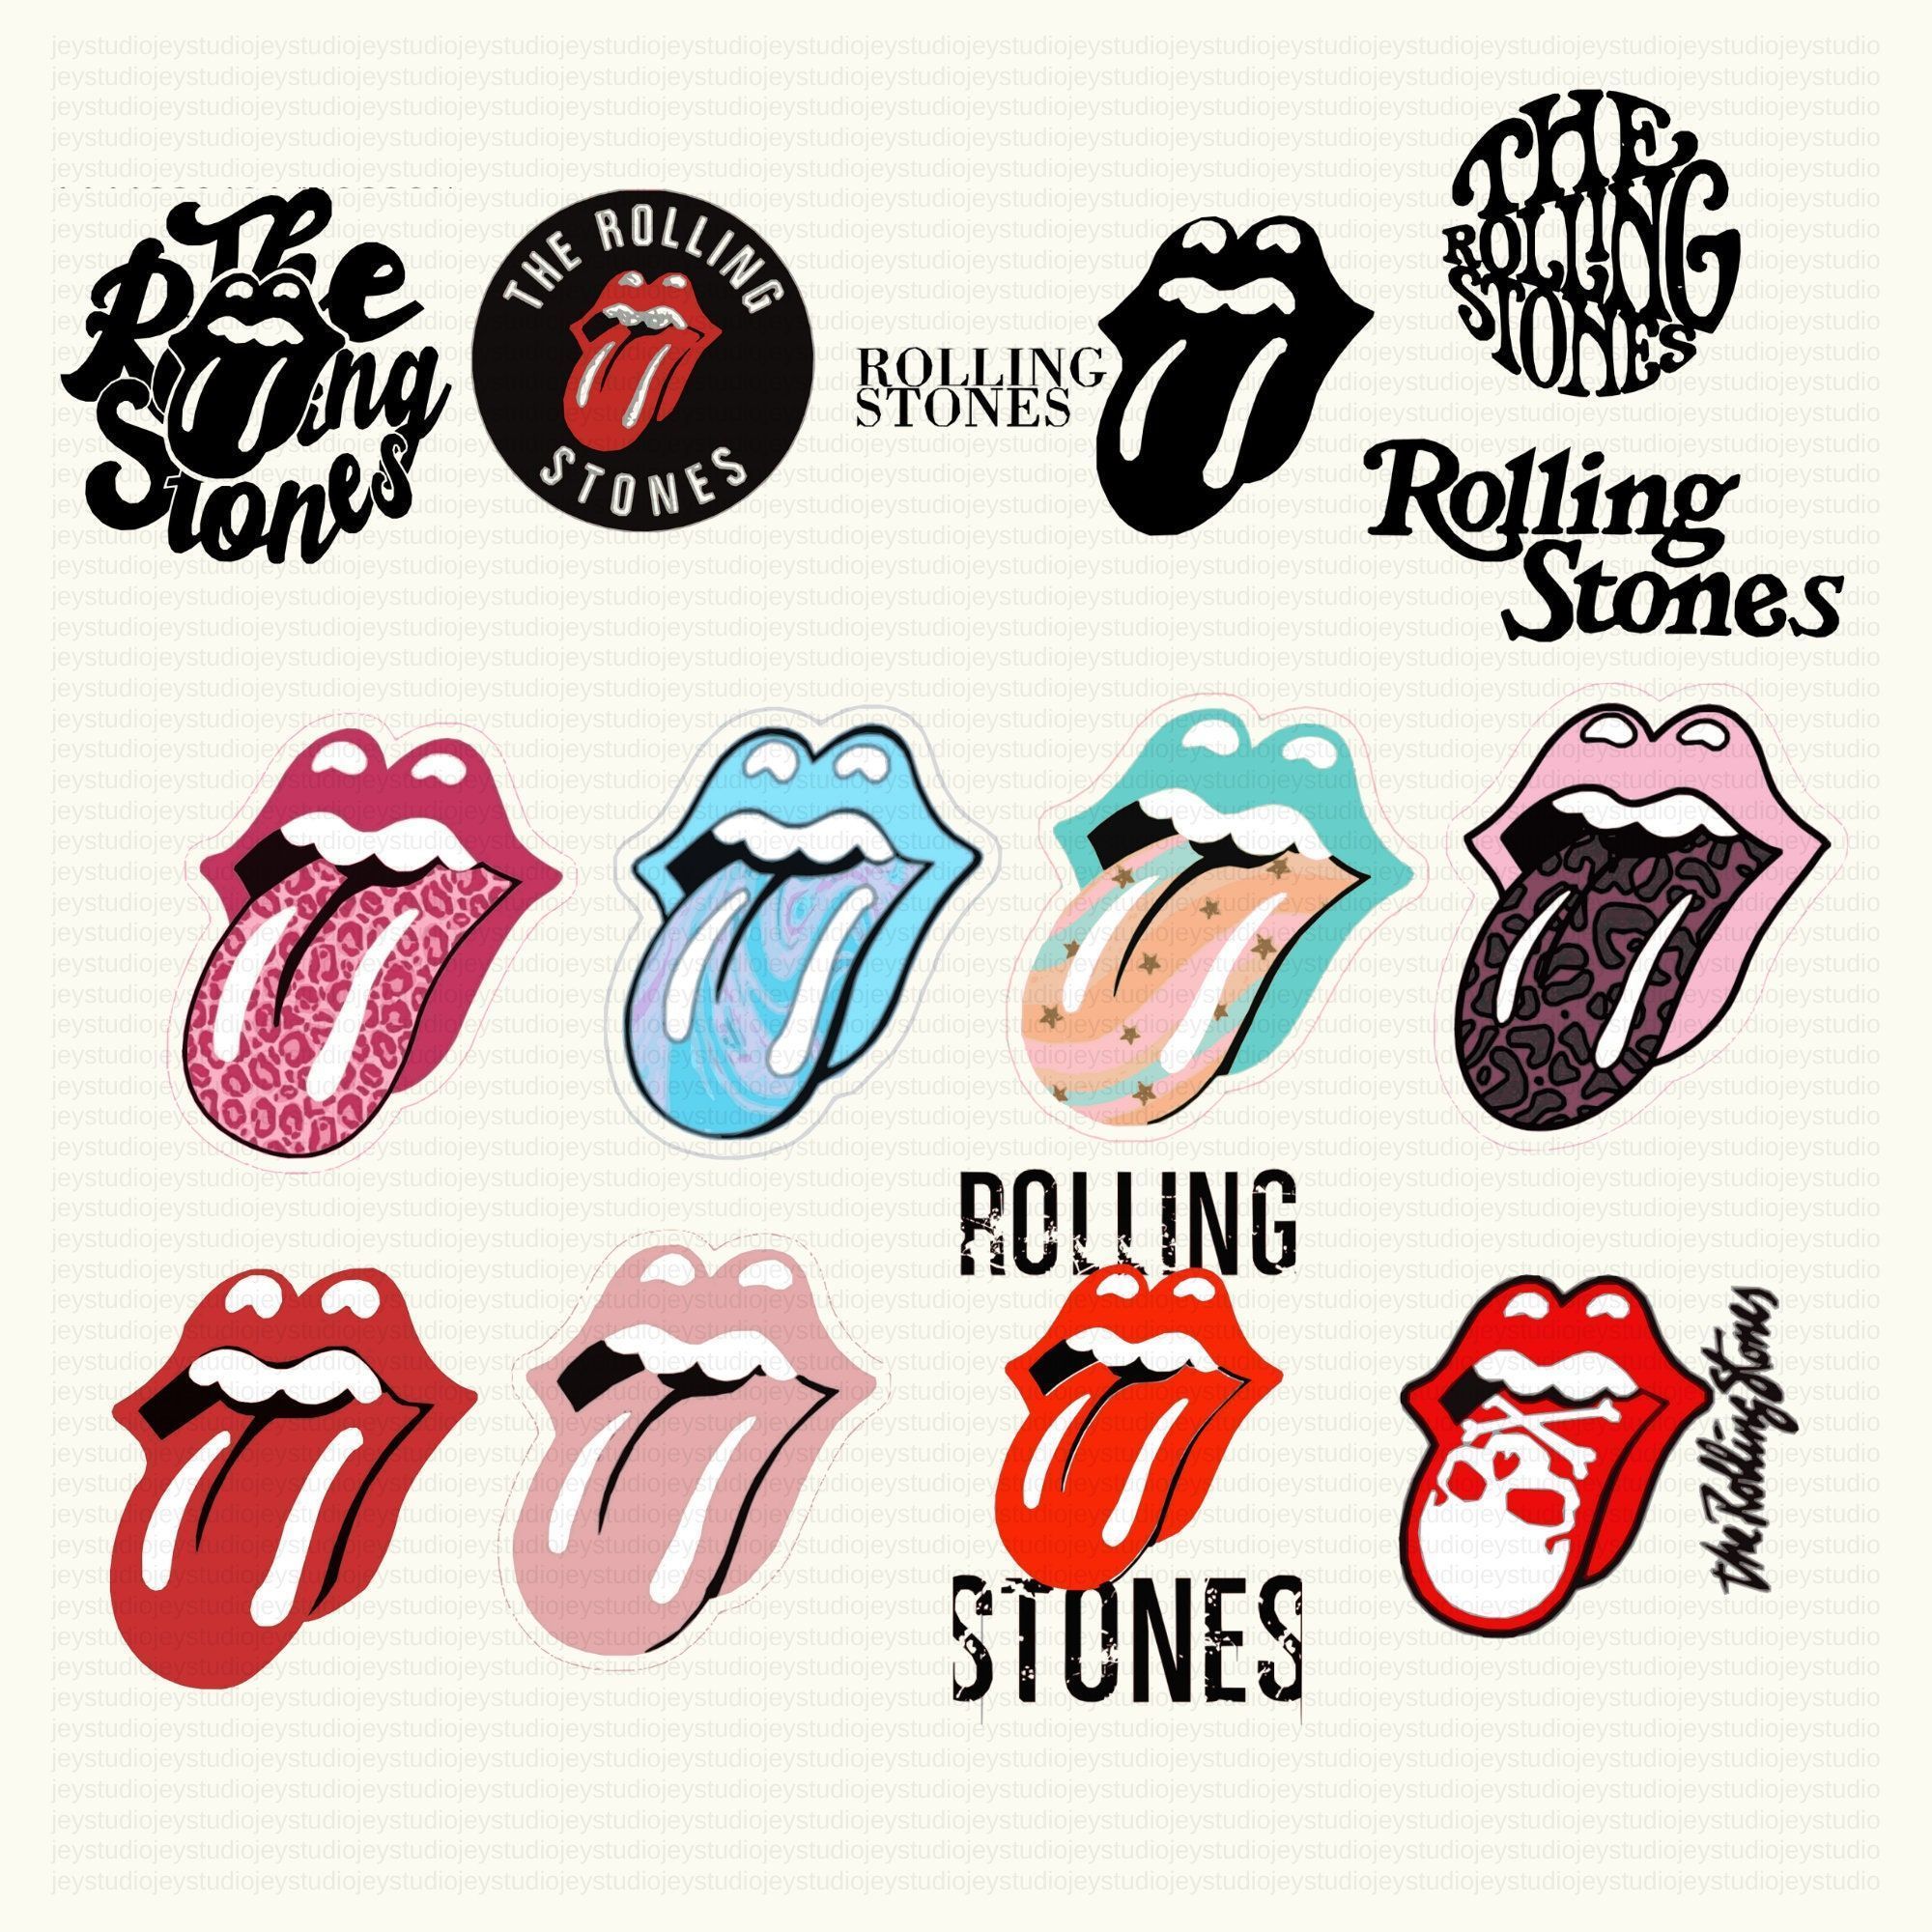 Rolling Stones Bands